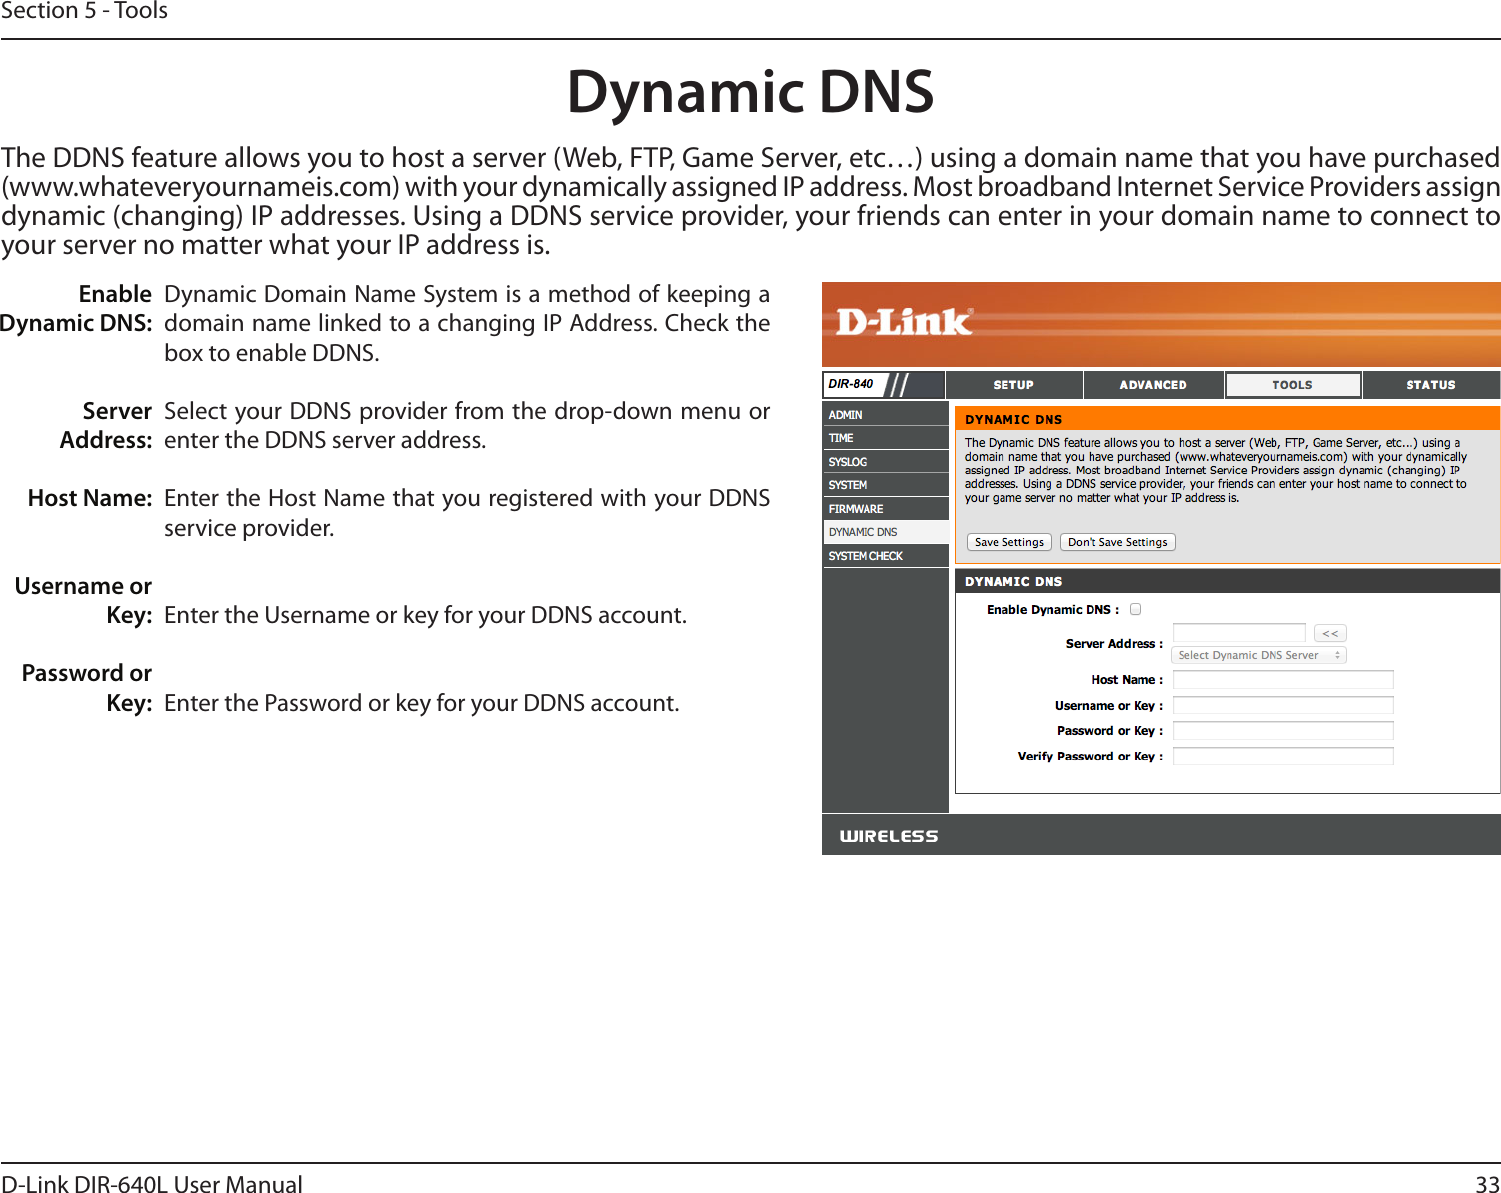 33D-Link DIR-640L User ManualSection 5 - ToolsDynamic Domain Name System is a method of keeping a domain name linked to a changing IP Address. Check the box to enable DDNS.Select your DDNS provider from the drop-down menu or enter the DDNS server address.Enter the Host Name that you registered with your DDNS service provider.Enter the Username or key for your DDNS account.Enter the Password or key for your DDNS account.Enable Dynamic DNS:Server Address:Host Name:Username or Key:Password or Key:Dynamic DNSThe DDNS feature allows you to host a server (Web, FTP, Game Server, etc…) using a domain name that you have purchased (www.whateveryournameis.com) with your dynamically assigned IP address. Most broadband Internet Service Providers assign dynamic (changing) IP addresses. Using a DDNS service provider, your friends can enter in your domain name to connect to your server no matter what your IP address is.